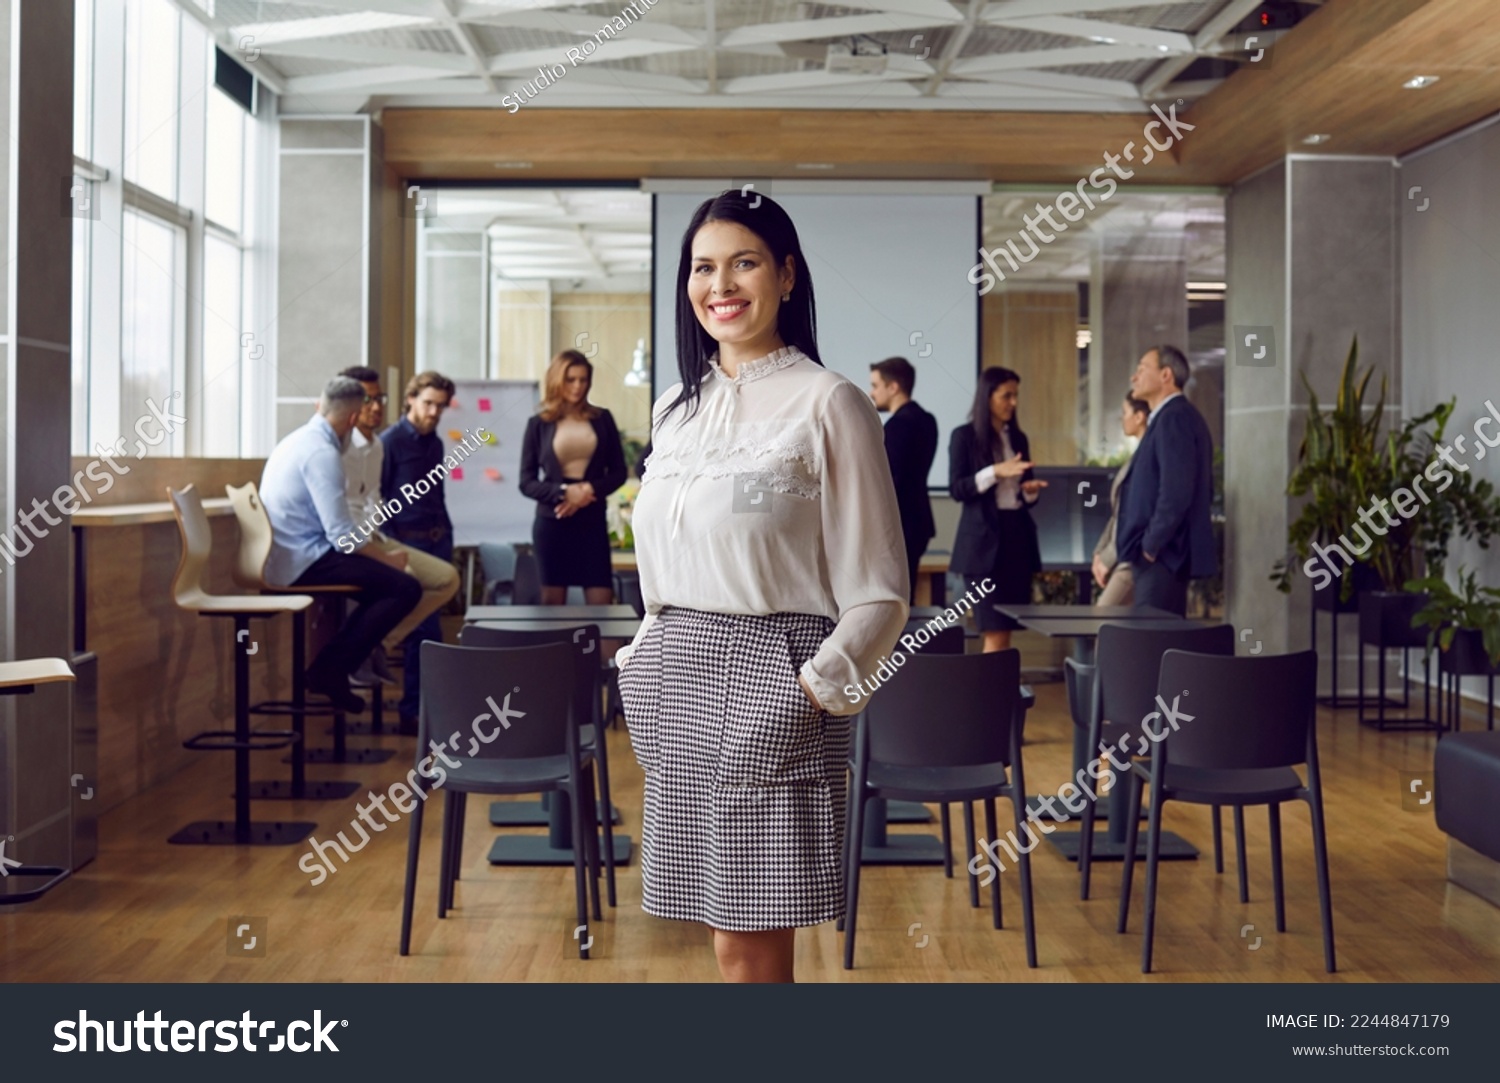 Portrait of friendly and successful business woman standing against background of colleagues in office. Millennial female leader or coach stands against background of people talking to each other. #2244847179